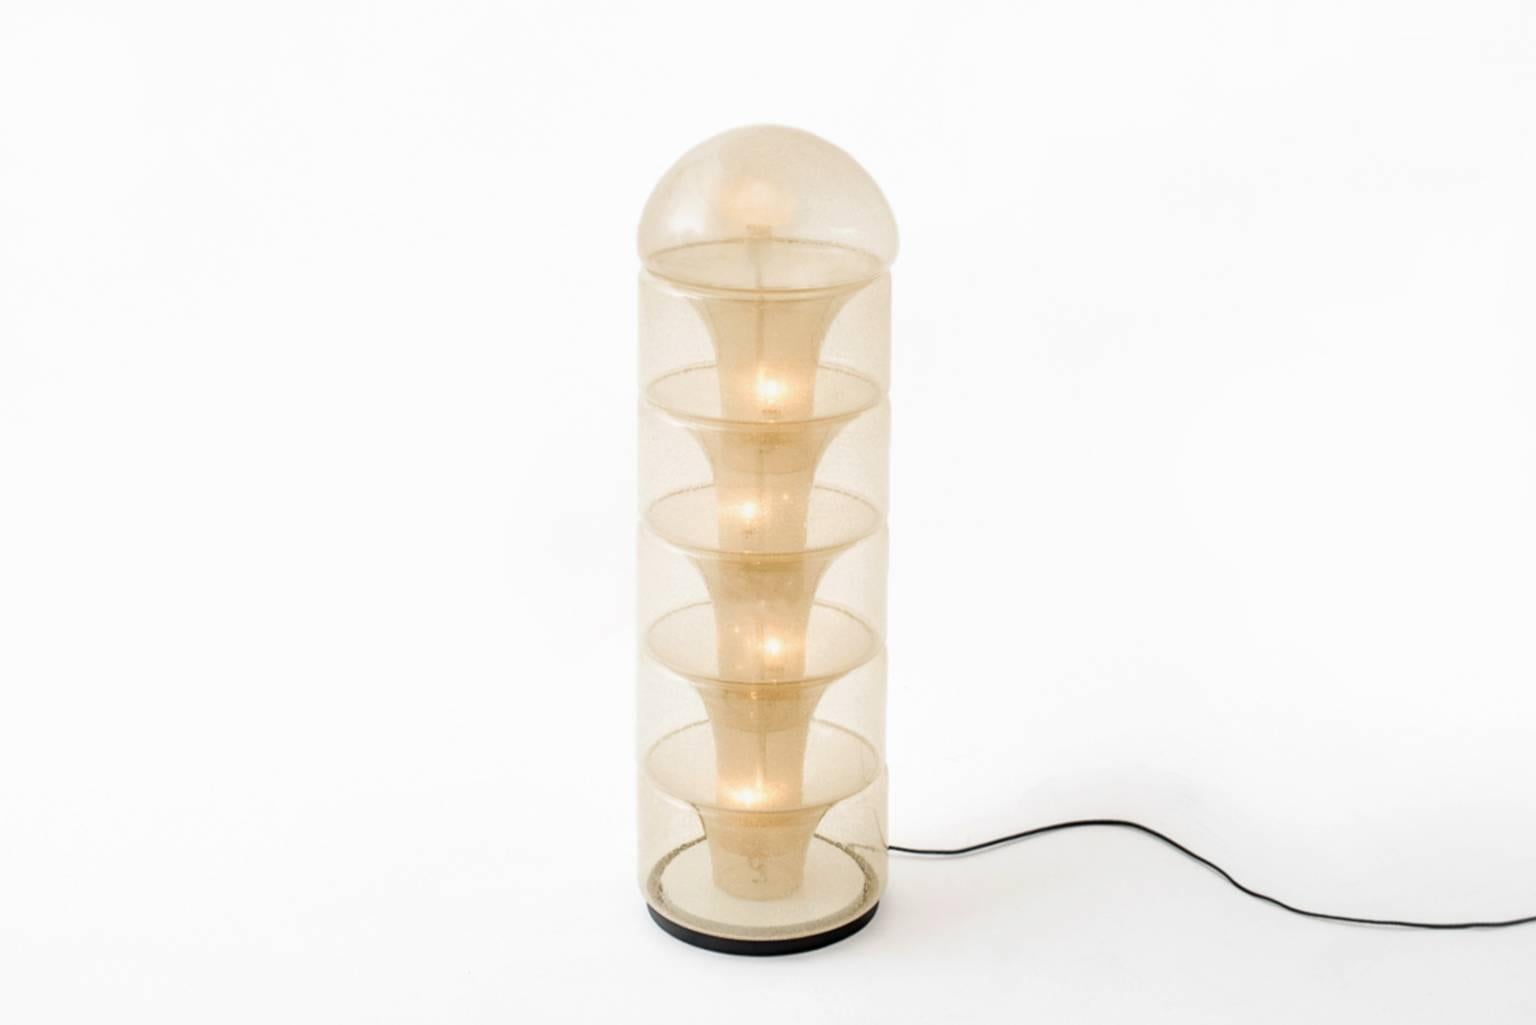 ‘Sfumato’ LT 316 floor lamp by Carlo Nason for M.V.M. Mazzega, Italy, 1968.
Rare Pulegoso glass version (glass with lots of air bubbles). Composed of six interlocking glass parts and handblown in to a single mold. In excellent condition.

        